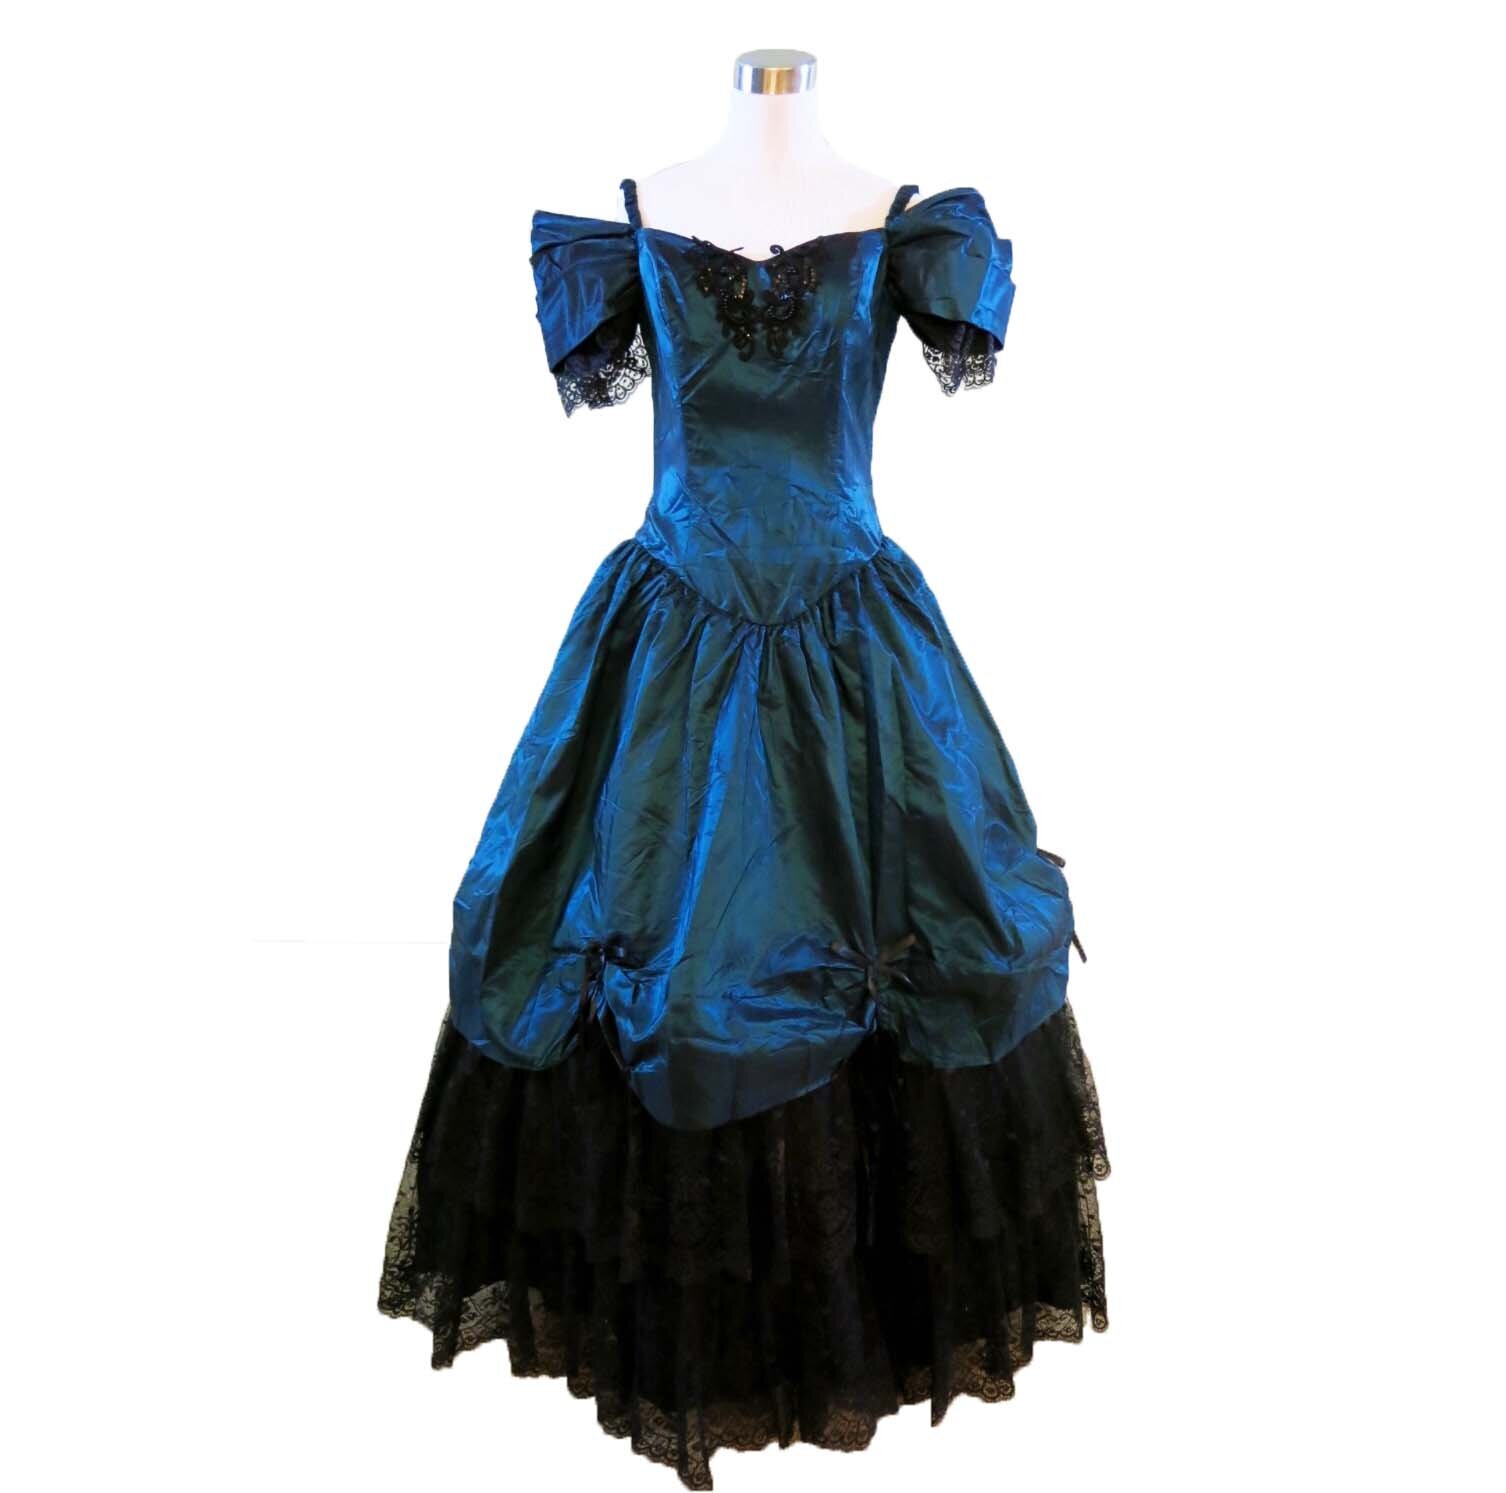 T 26.4 Blue and Black Lace Gown (waist - 26